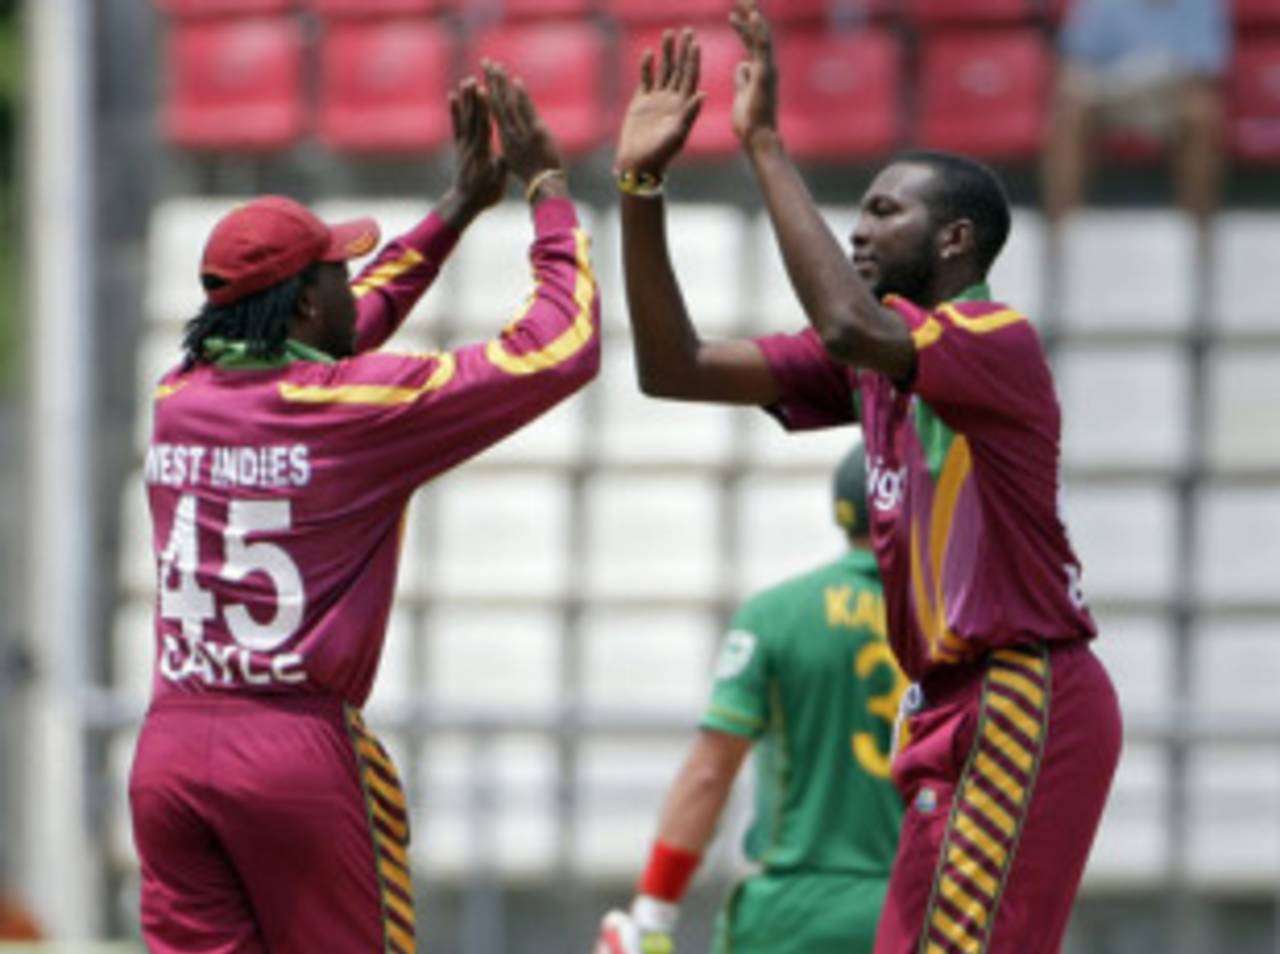 Chris Gayle and Sulieman Benn celebrate the wicket of Jacques Kallis, West Indies v South Africa, 3rd ODI, Dominica, May 28, 2010